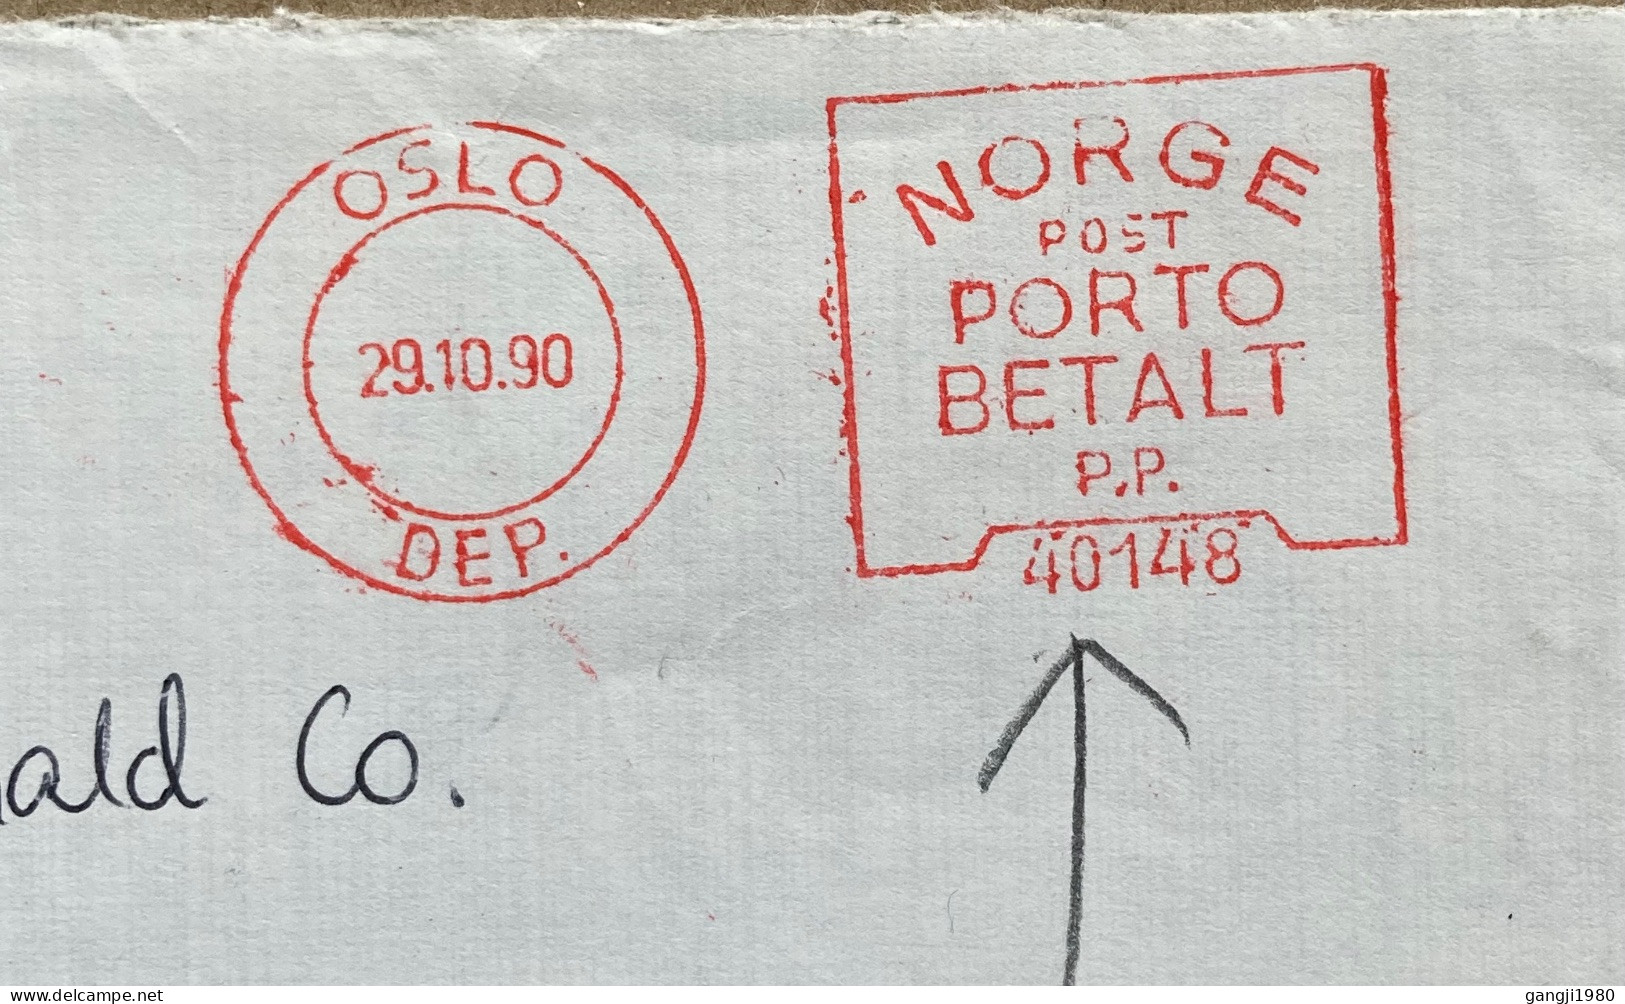 NORWAY1990, ILLUSTRATE COVER, USED TO USA, METER MACHINE CANCEL, NORGE POST, PORTO BETALT, COVER NUP, OF INTERNATIONAL A - Brieven En Documenten